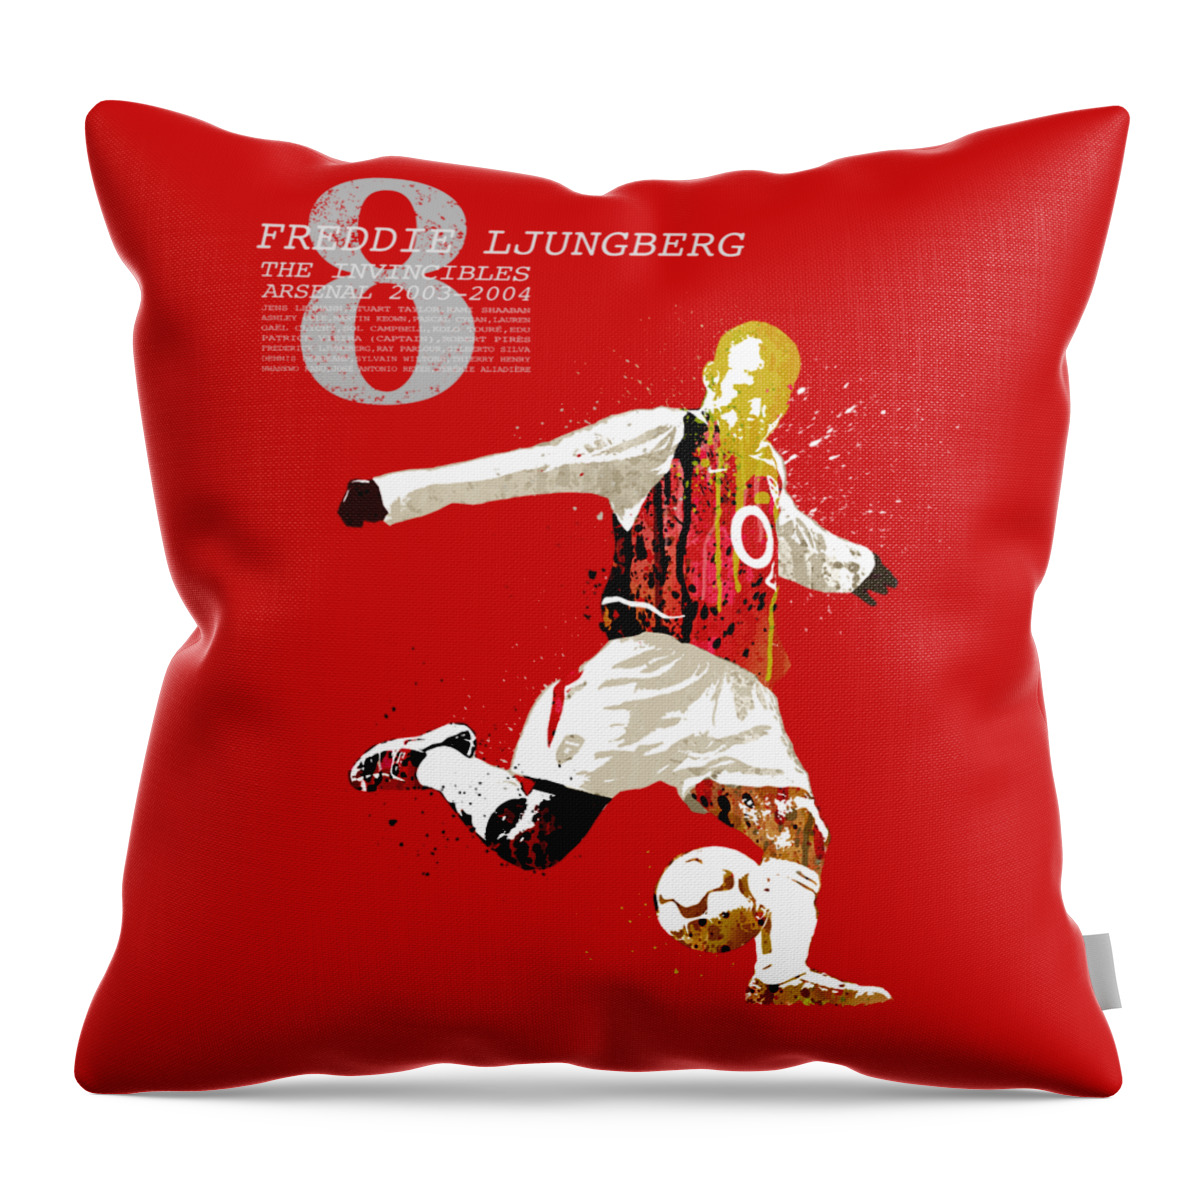 World Cup Throw Pillow featuring the painting Freddie Ljungberg - The invincibles by Art Popop